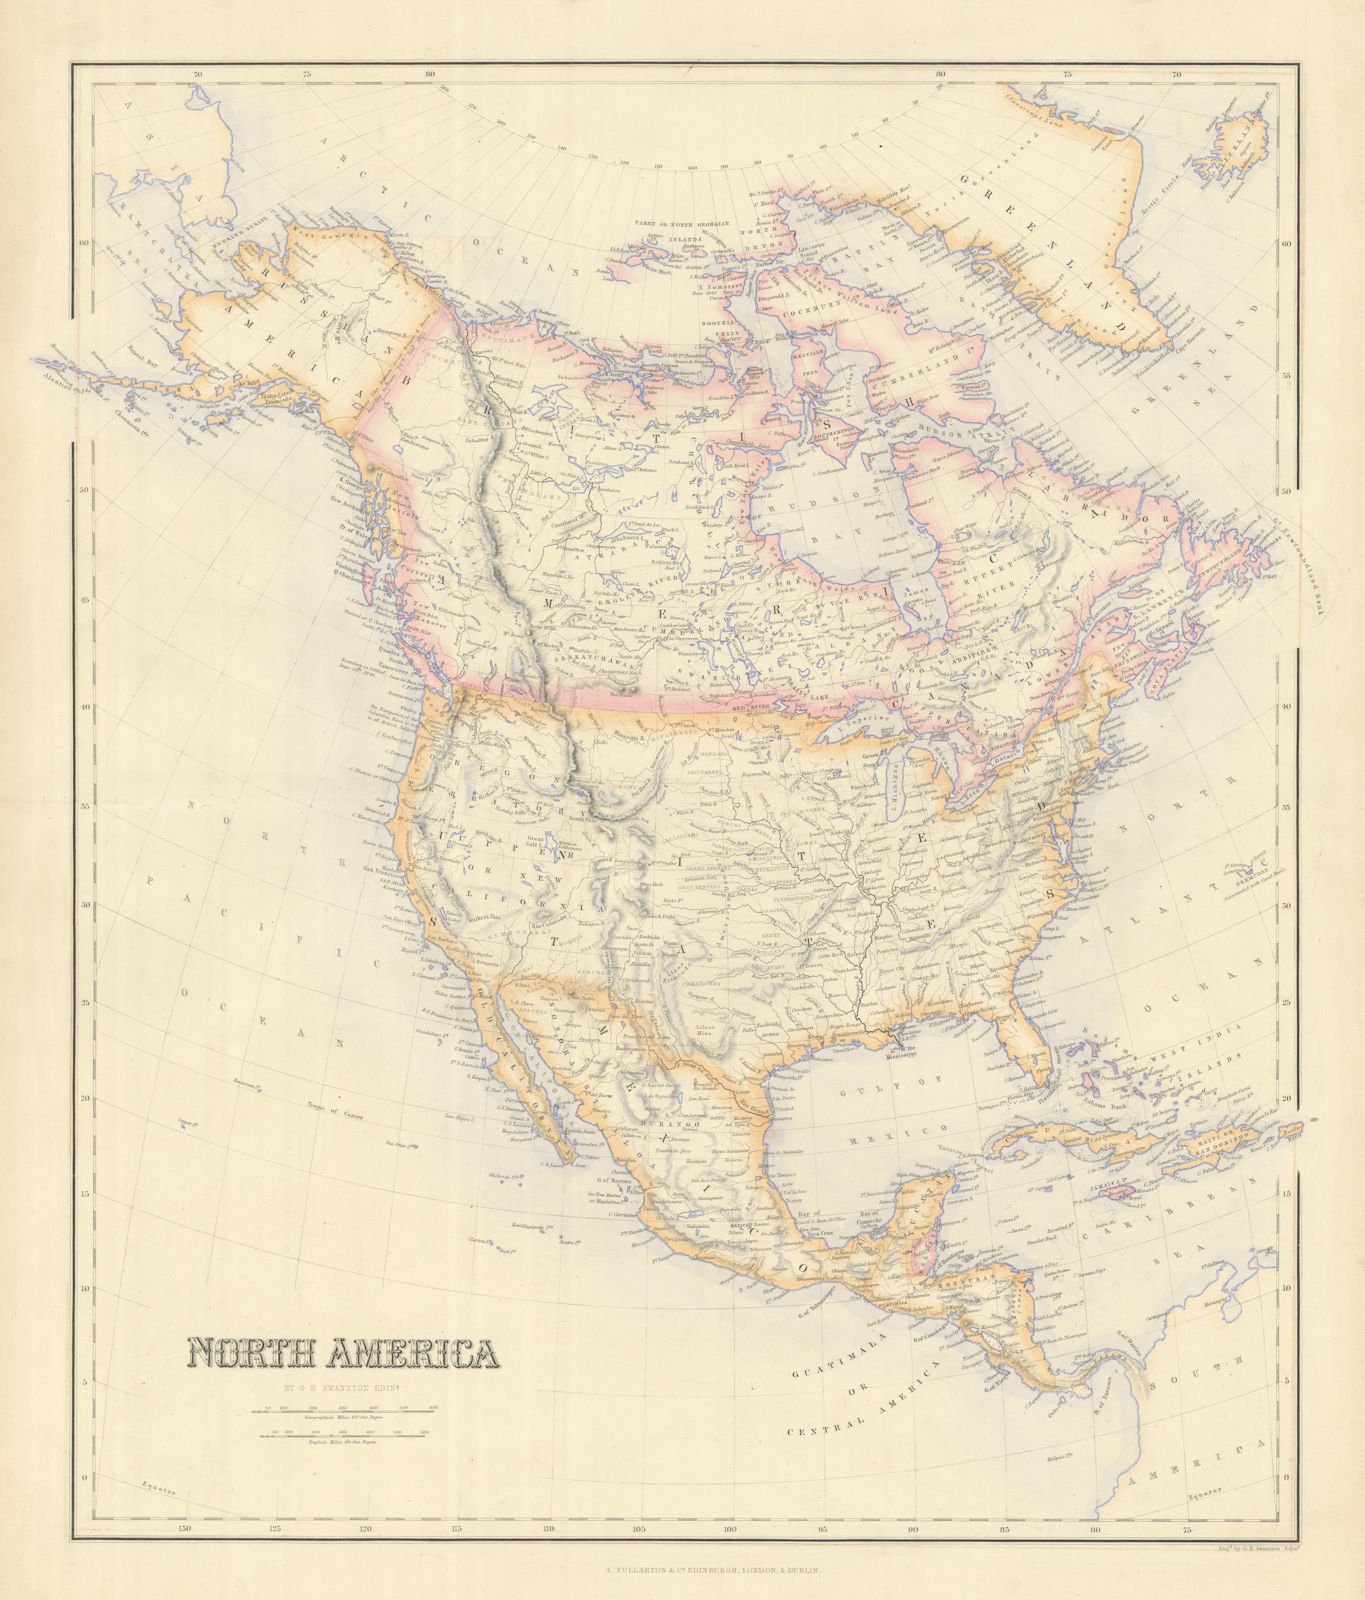 North America. New California. Native America tribes. SWANSTON 1860 old map